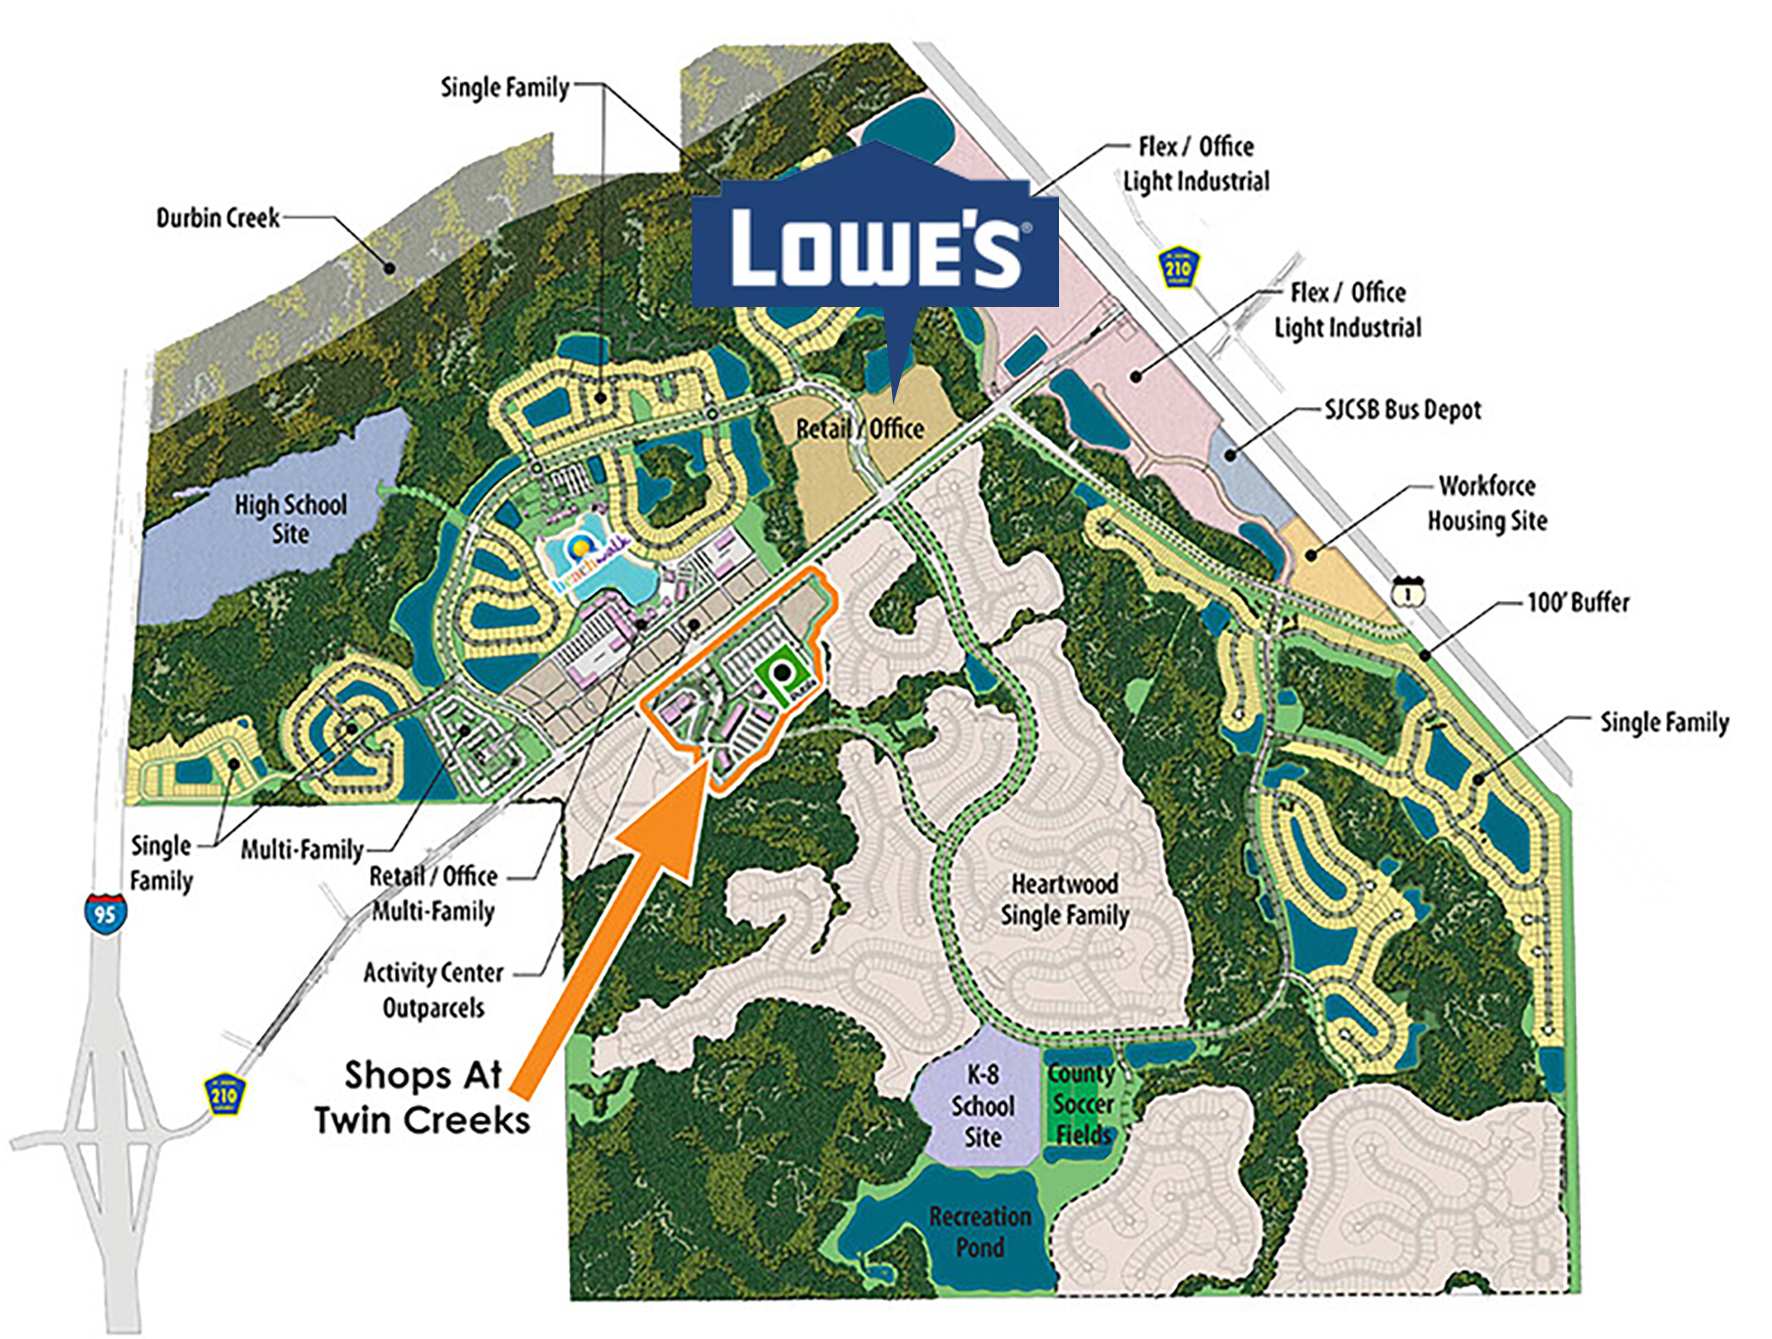 Lowe’s is planned for this area indicated as retail/office in the Twin Creeks development at Beachwalk.